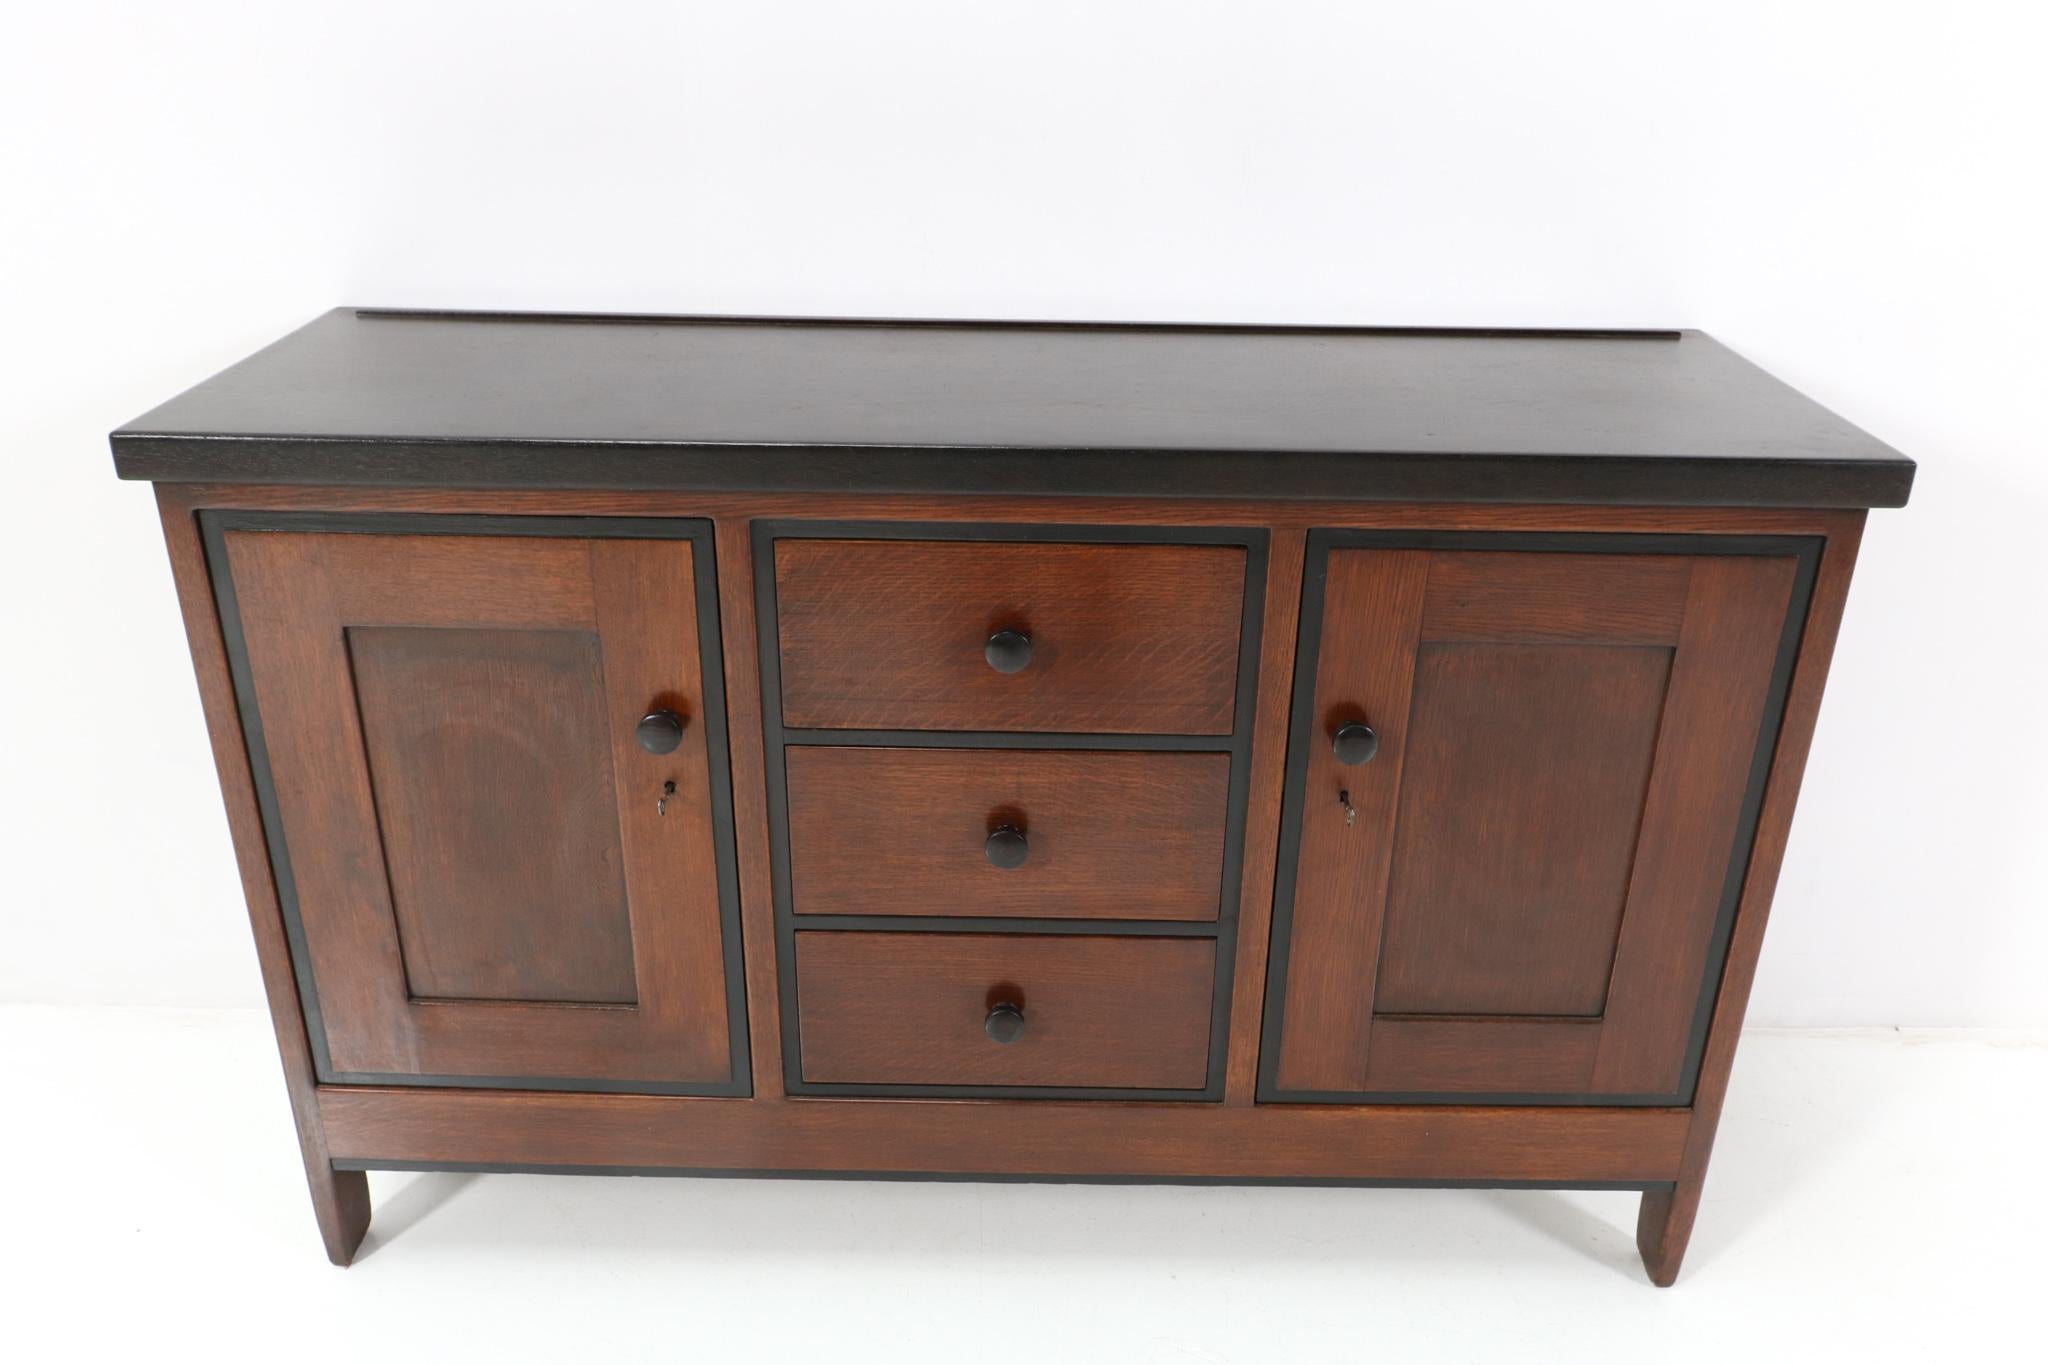 Early 20th Century Oak Art Deco Modernist Credenza or Sideboard by Frits Spanjaard for L.O.V.